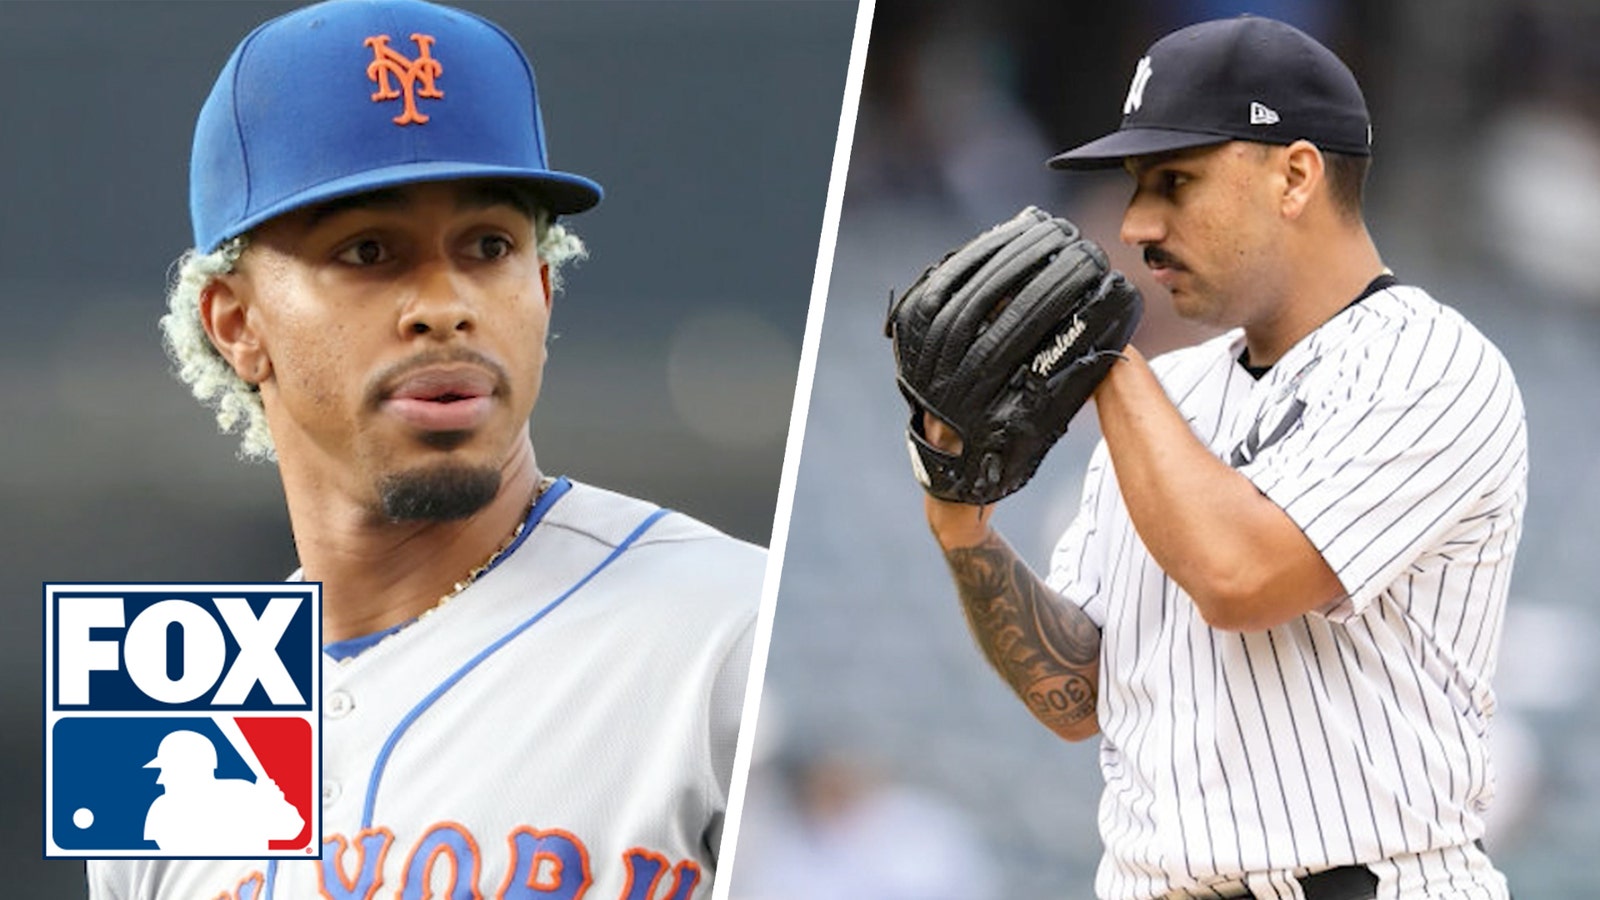 Mets vs. Yankees: Which team is better?